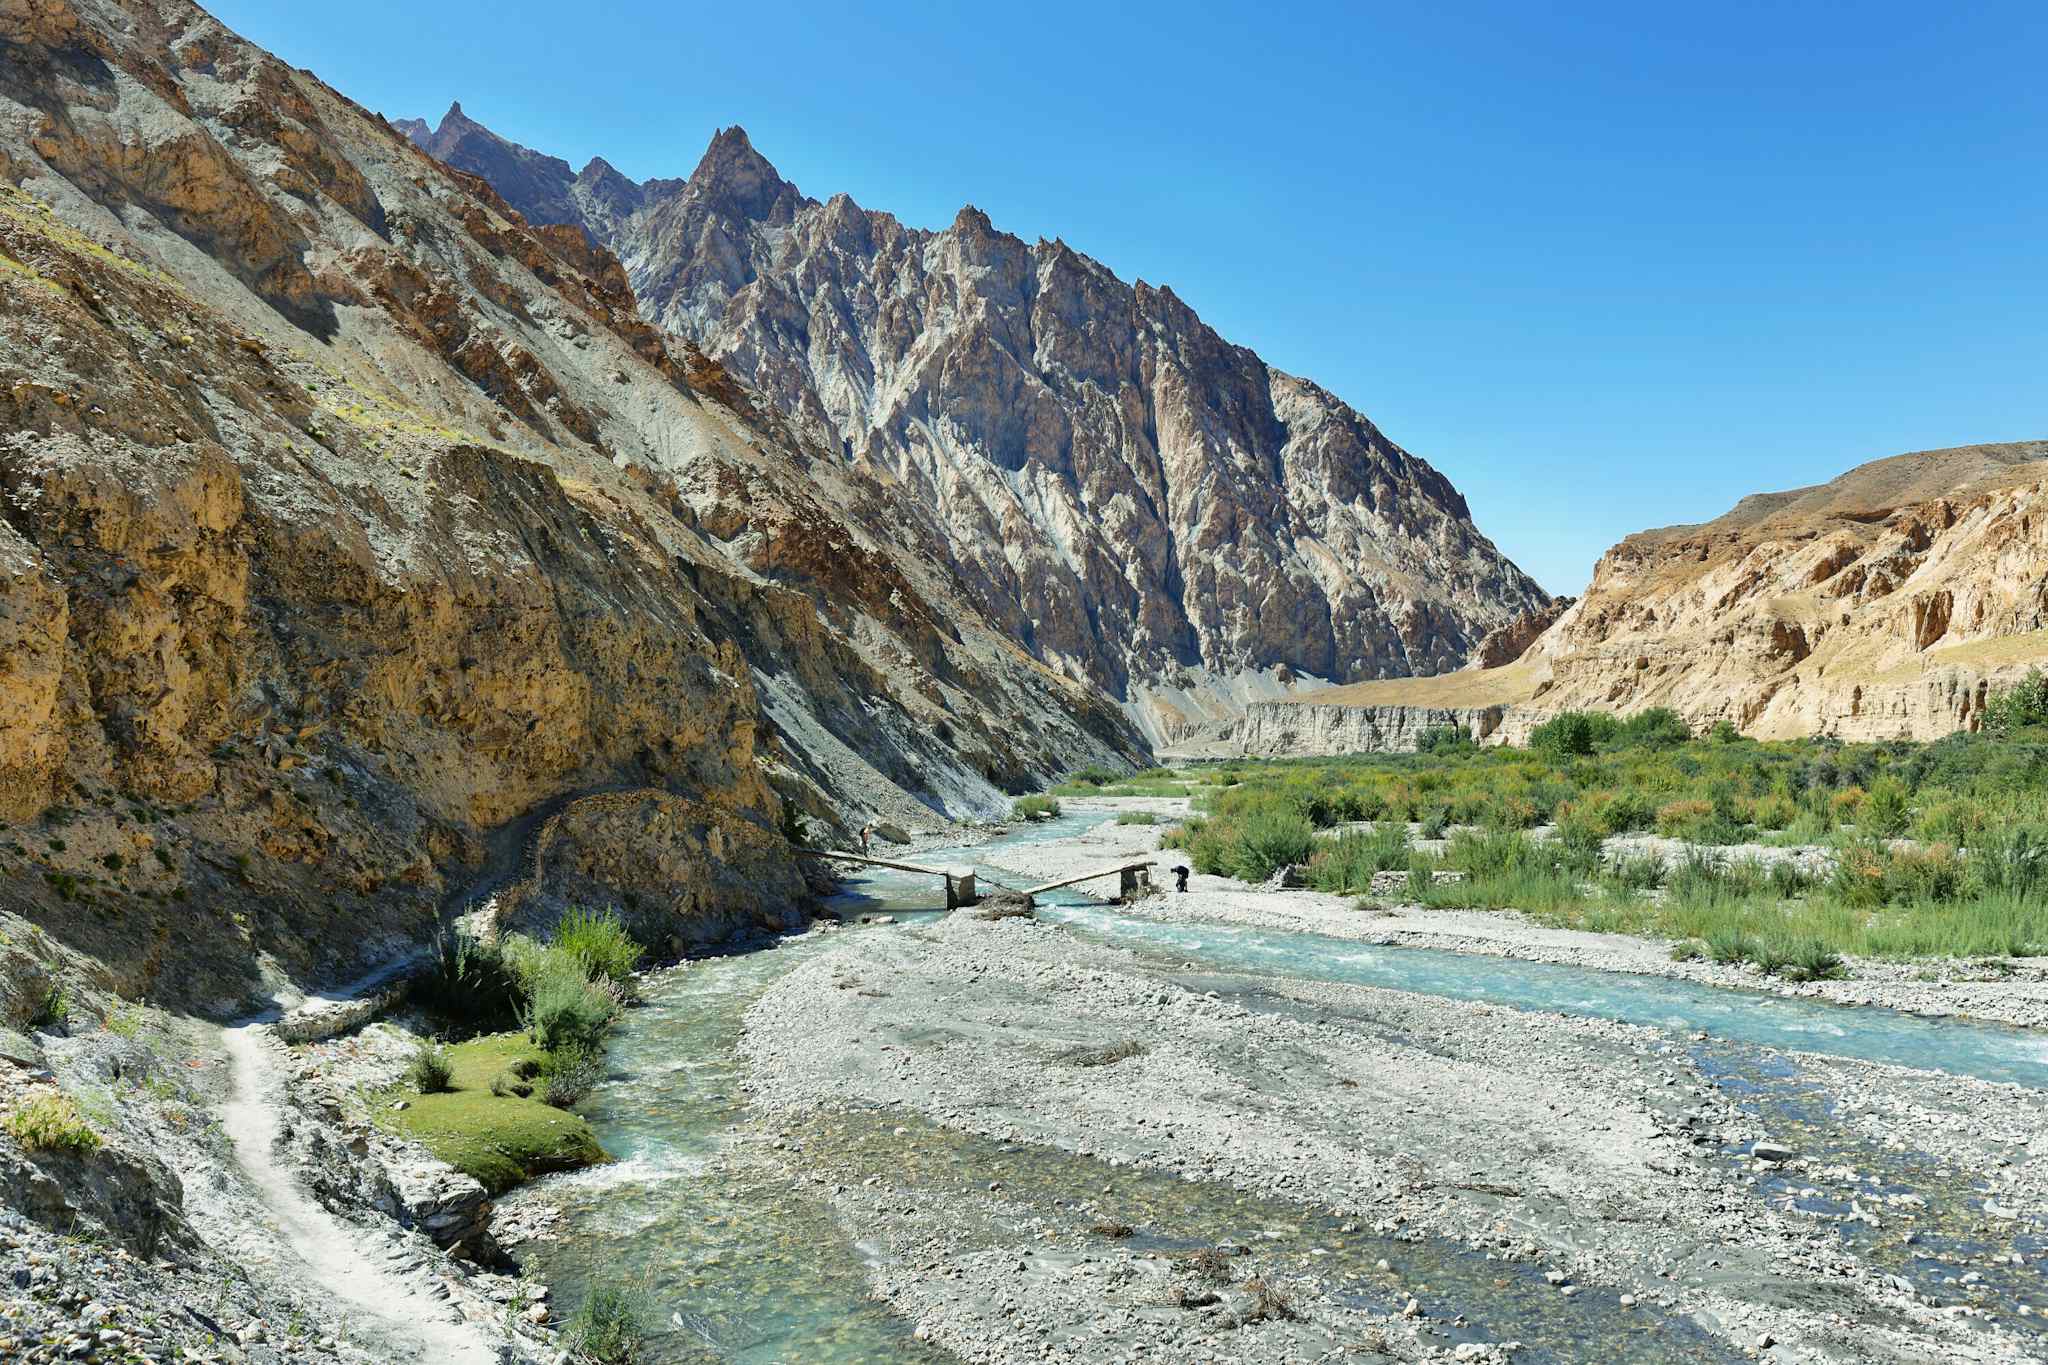 River flowing through the Markha Valley with rocky cliffs behind in Ladakh, India.